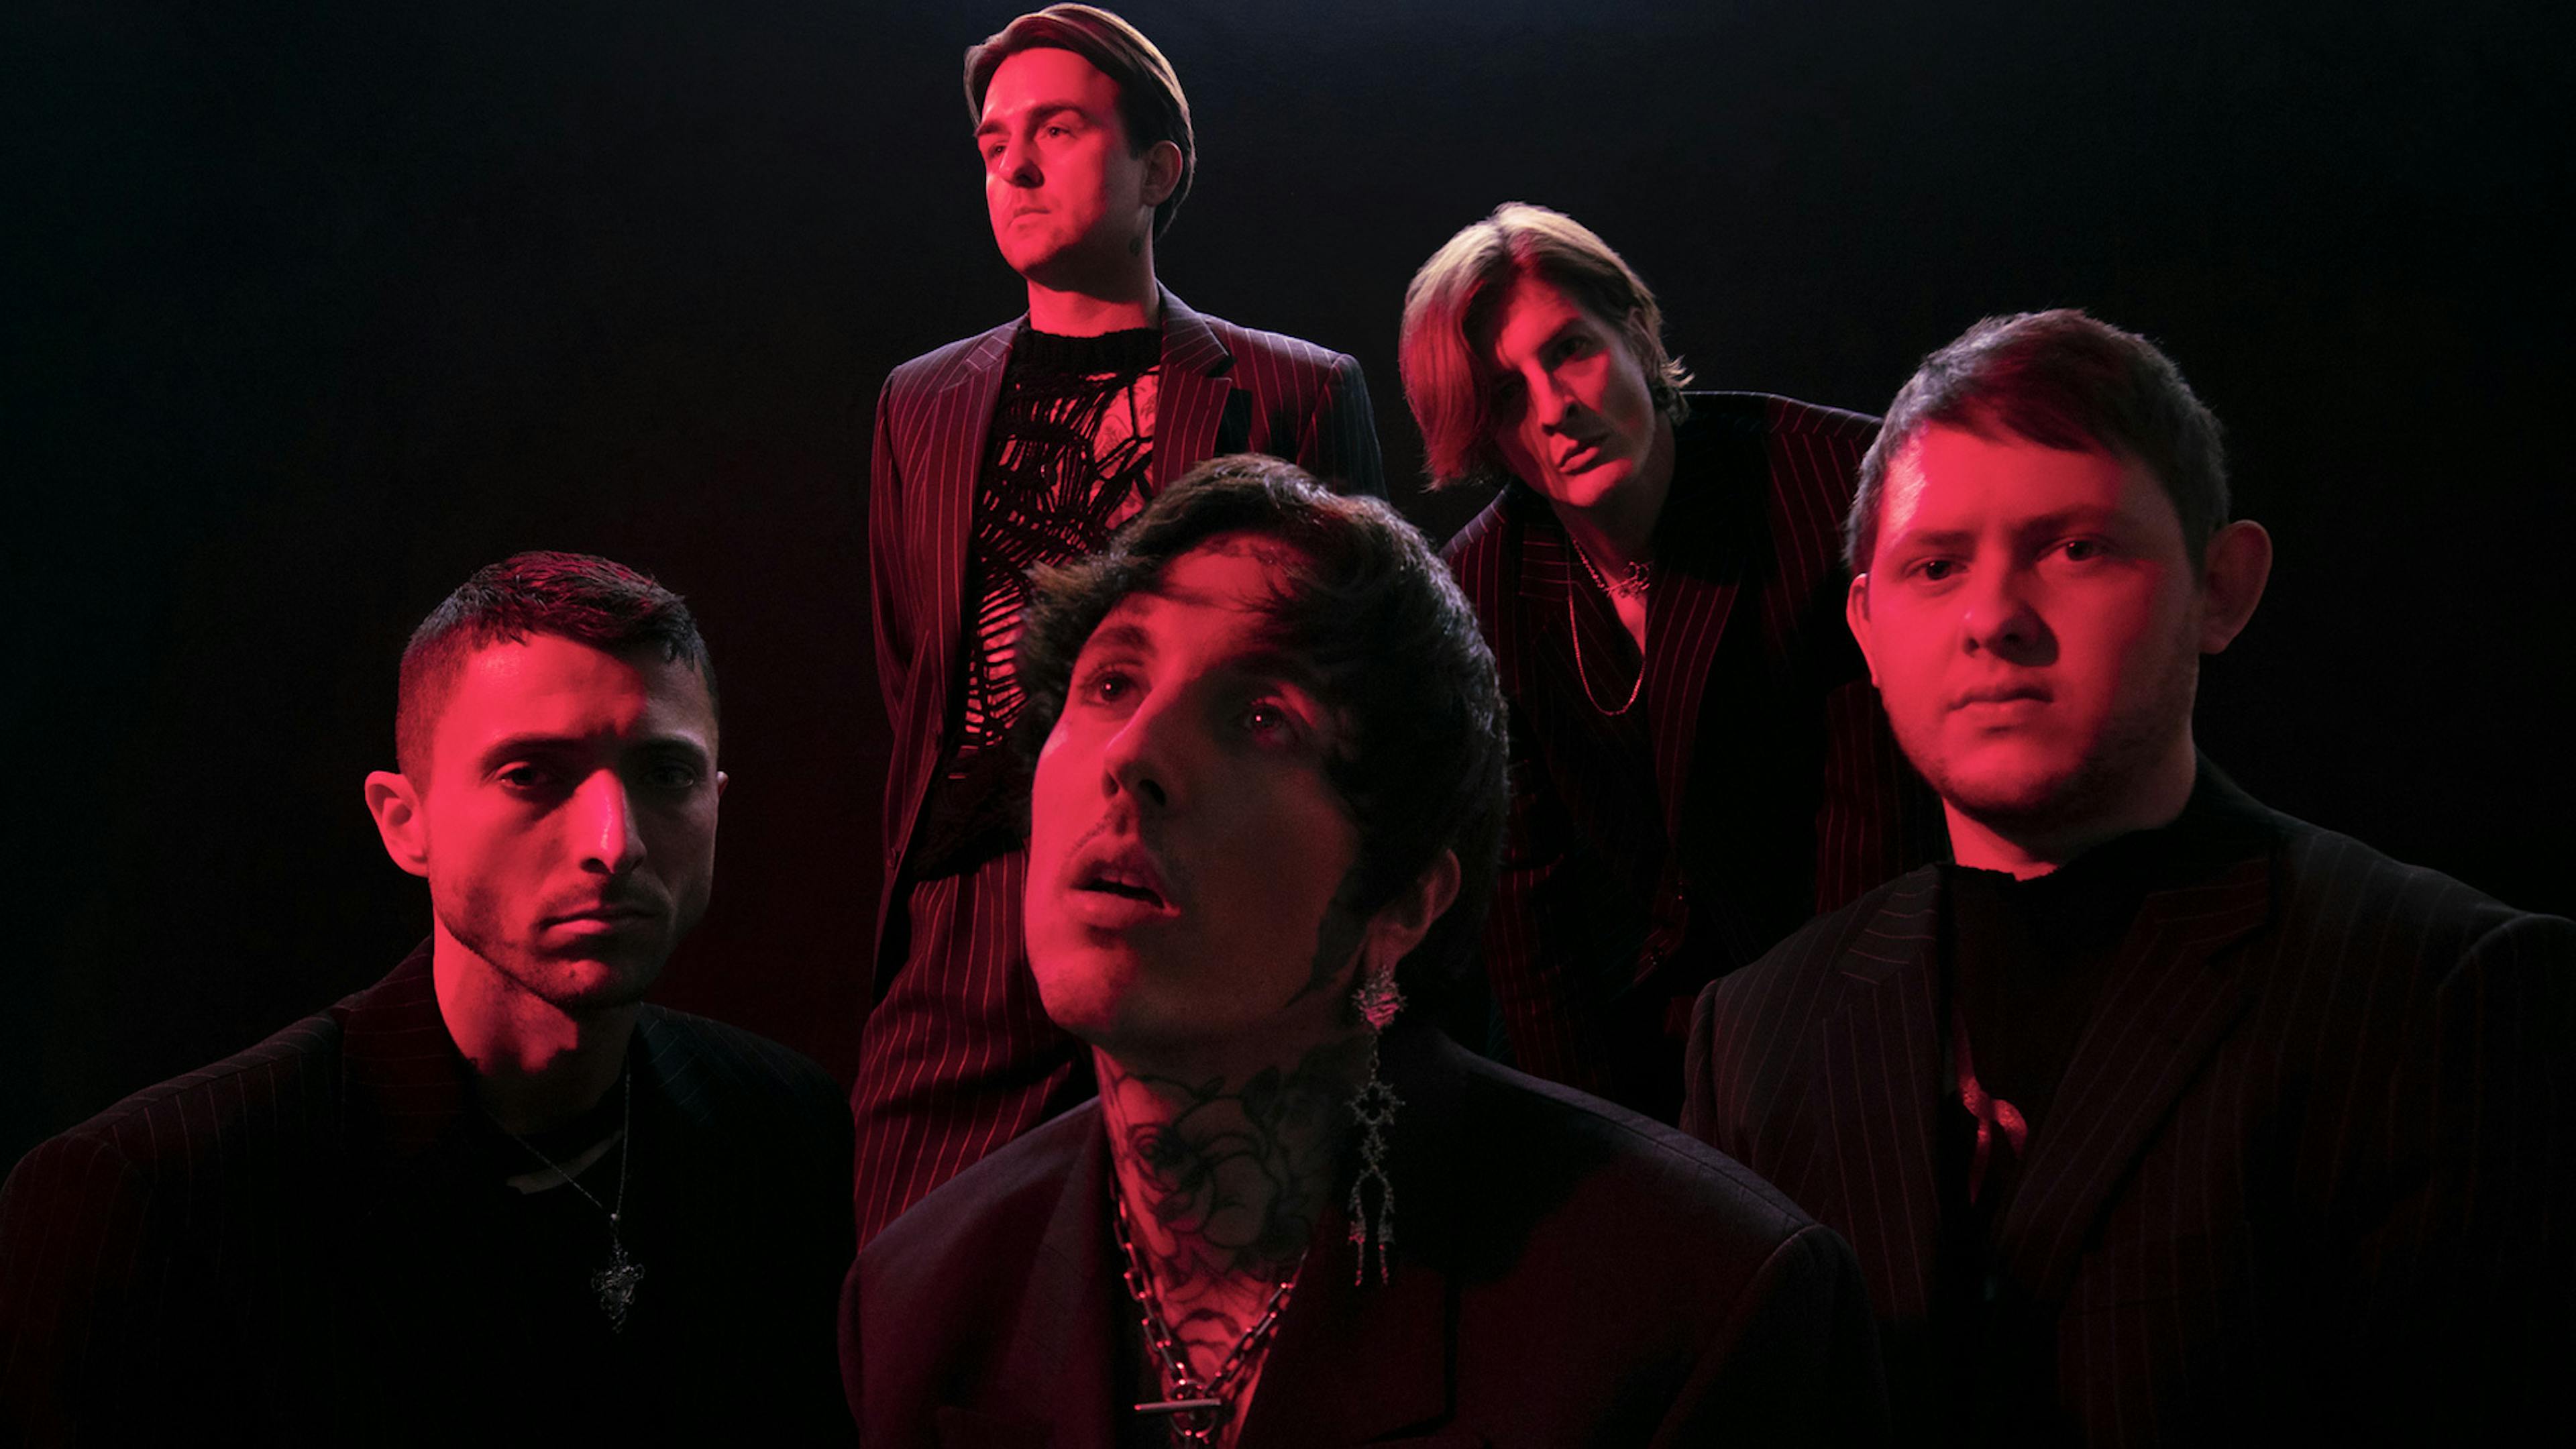 Bring Me The Horizon drop snippets of new music in latest… Kerrang!